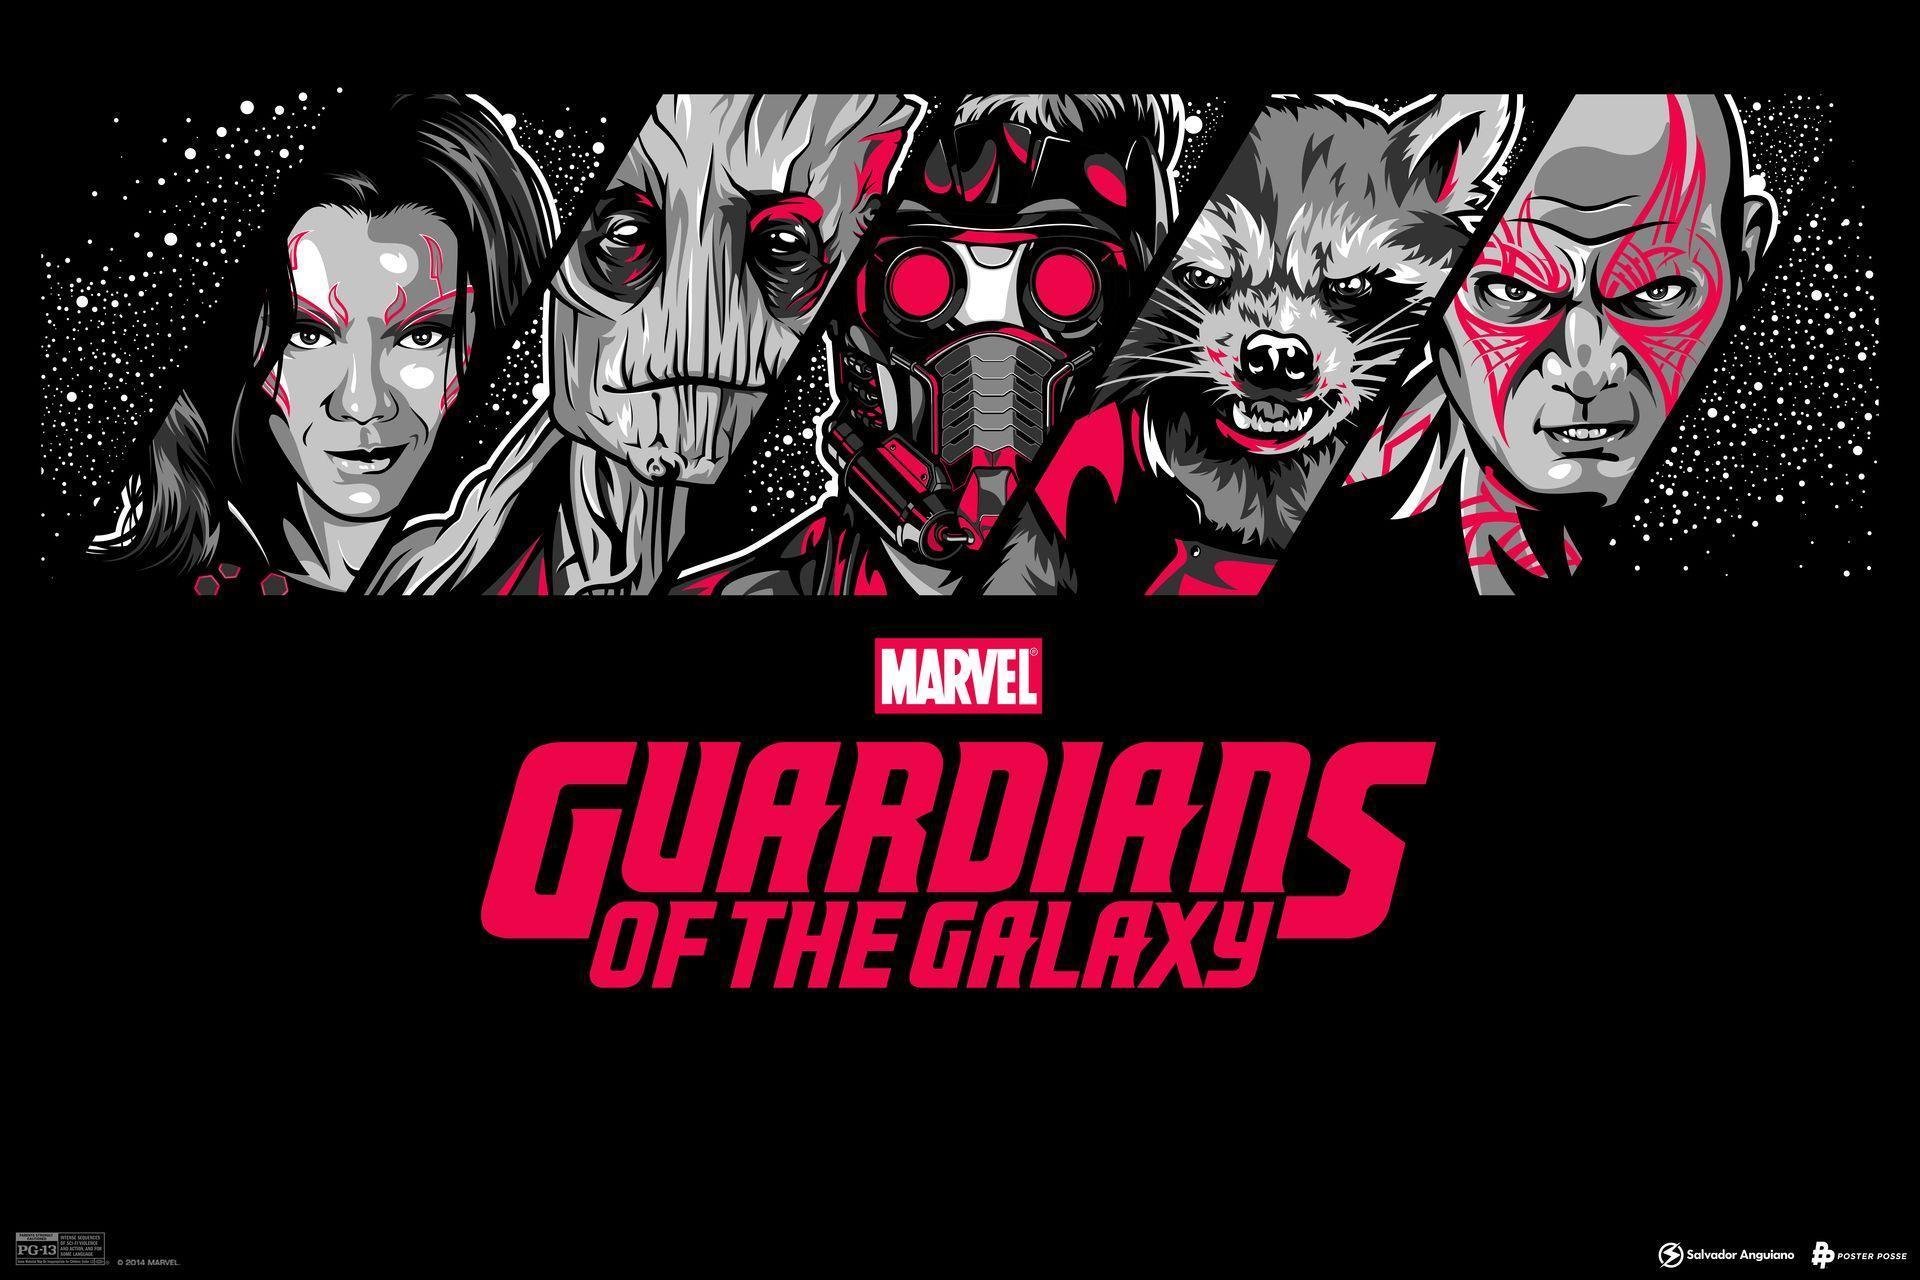 Guardians of the Galaxy 2 HD wallpaper free download